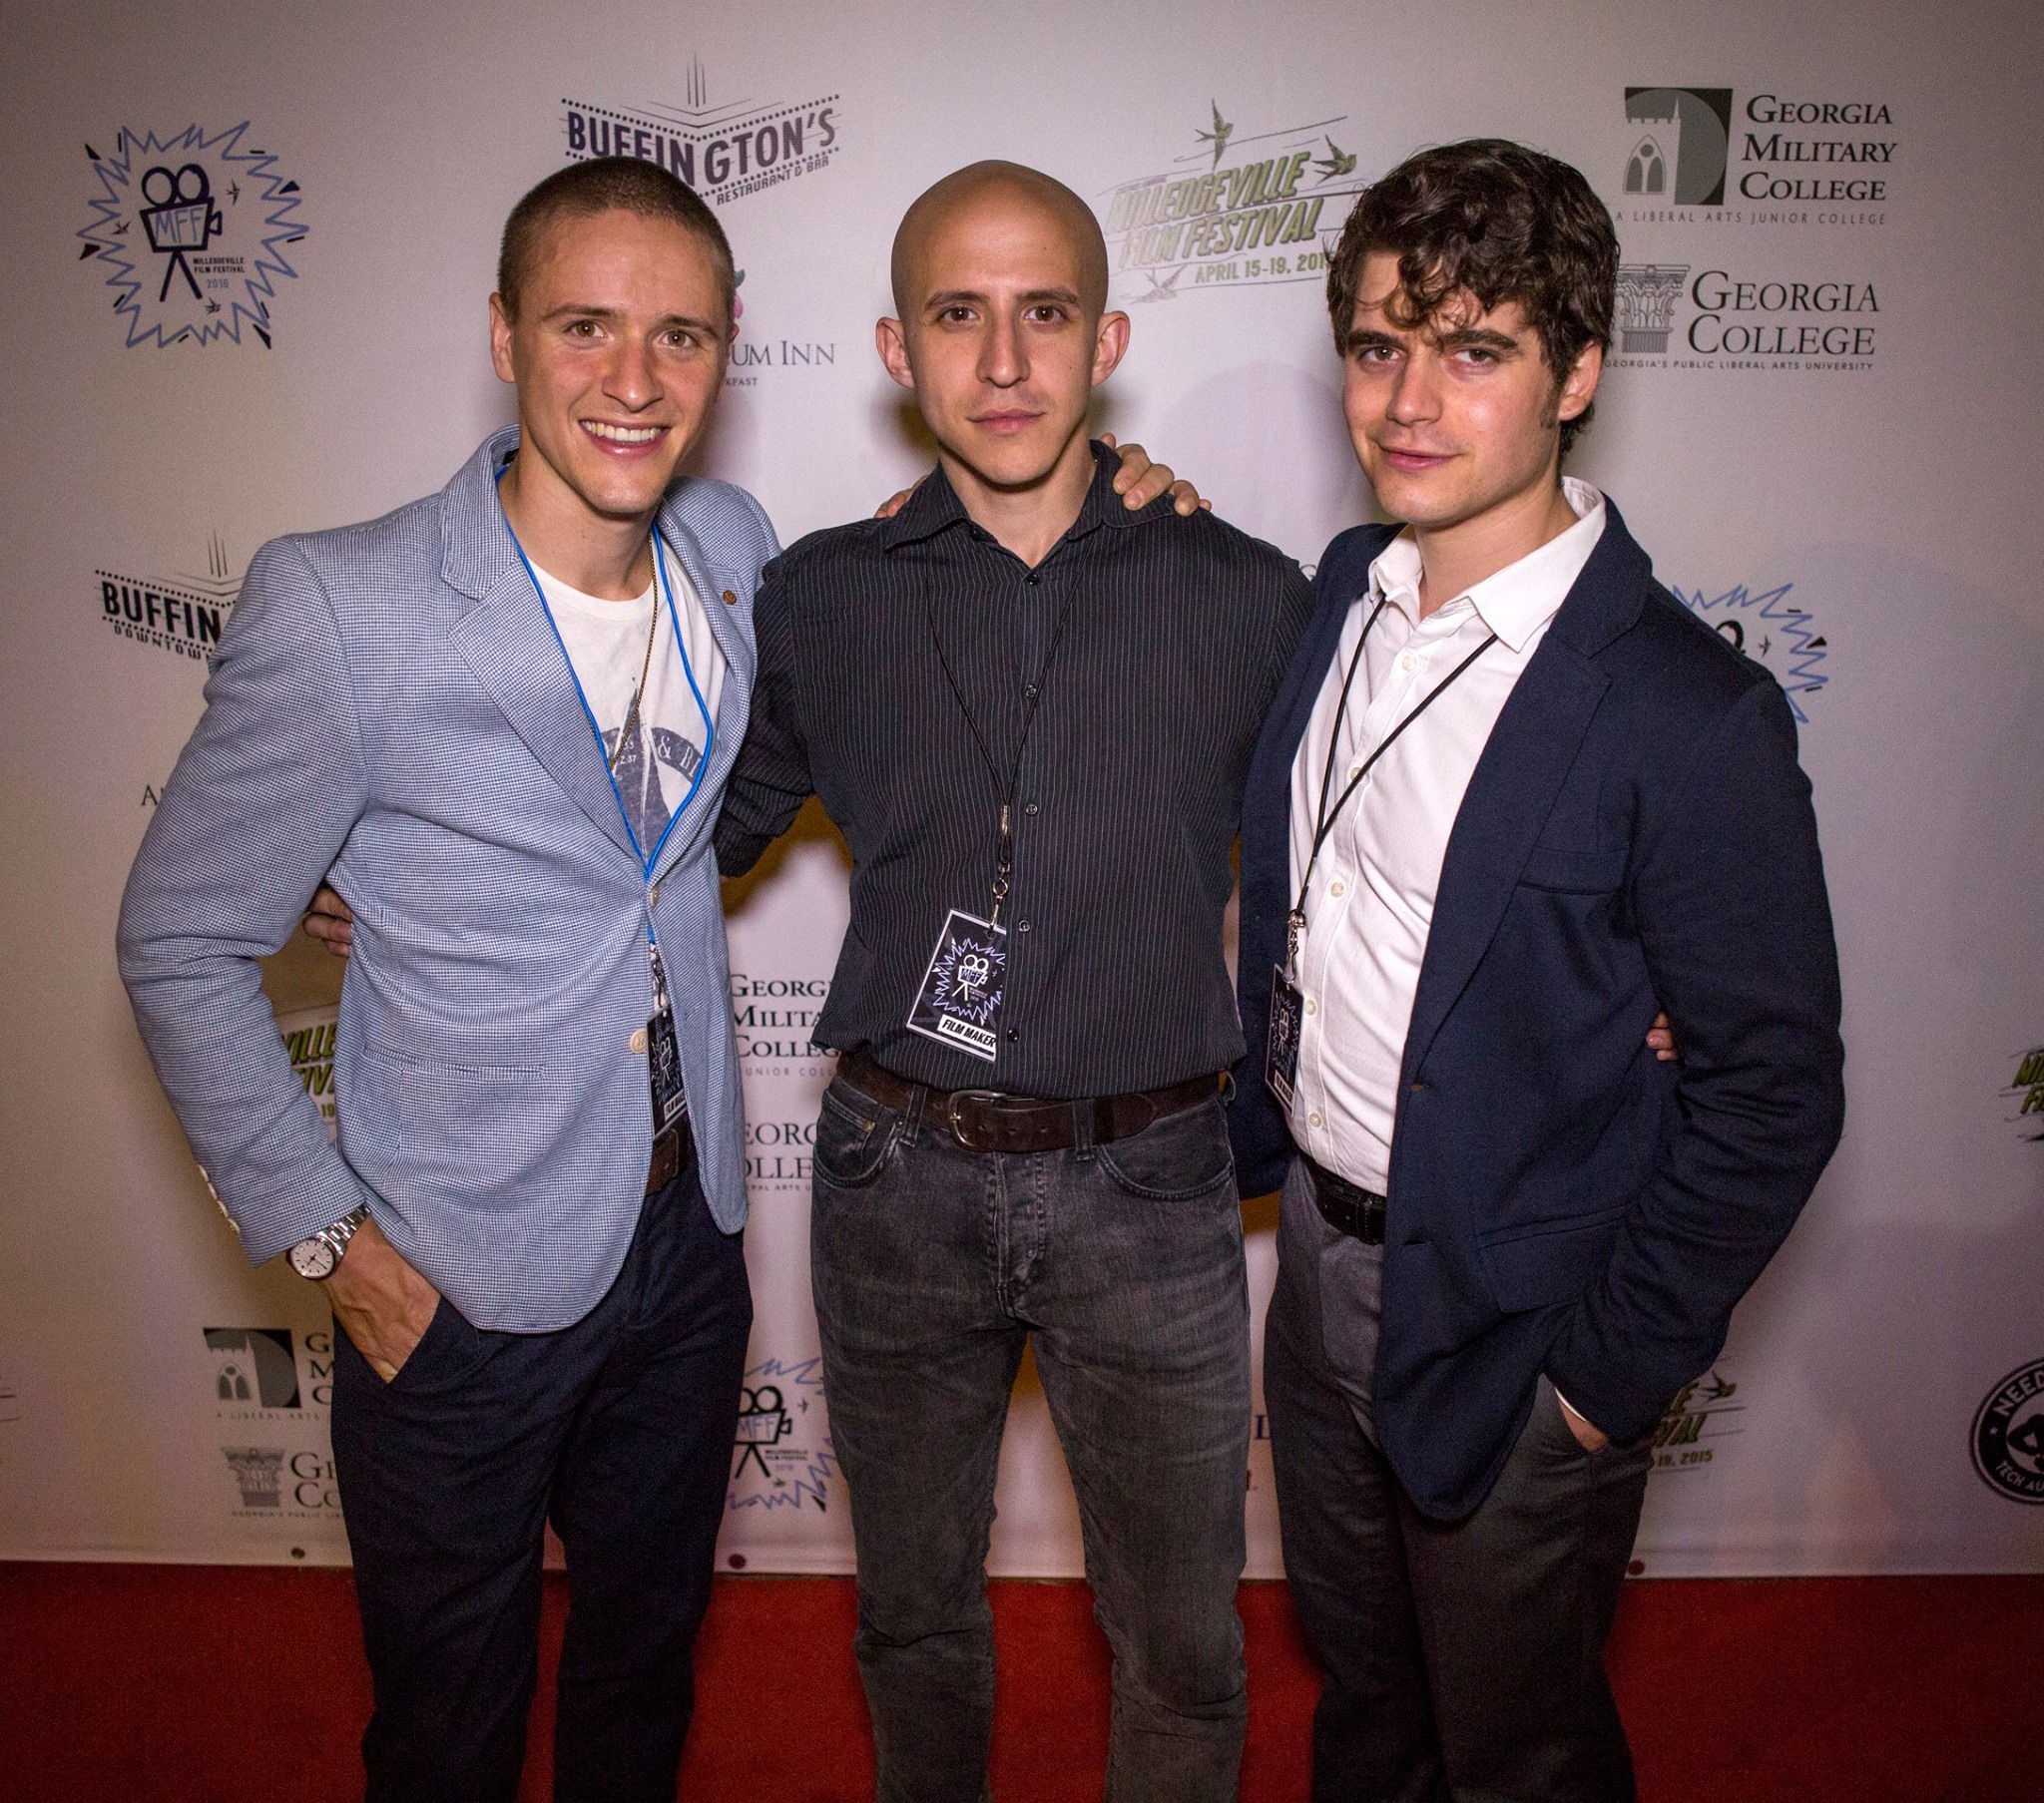 At the Milledgeville film festival 2015 for the red carpet event and screening of Boyhood (2015)